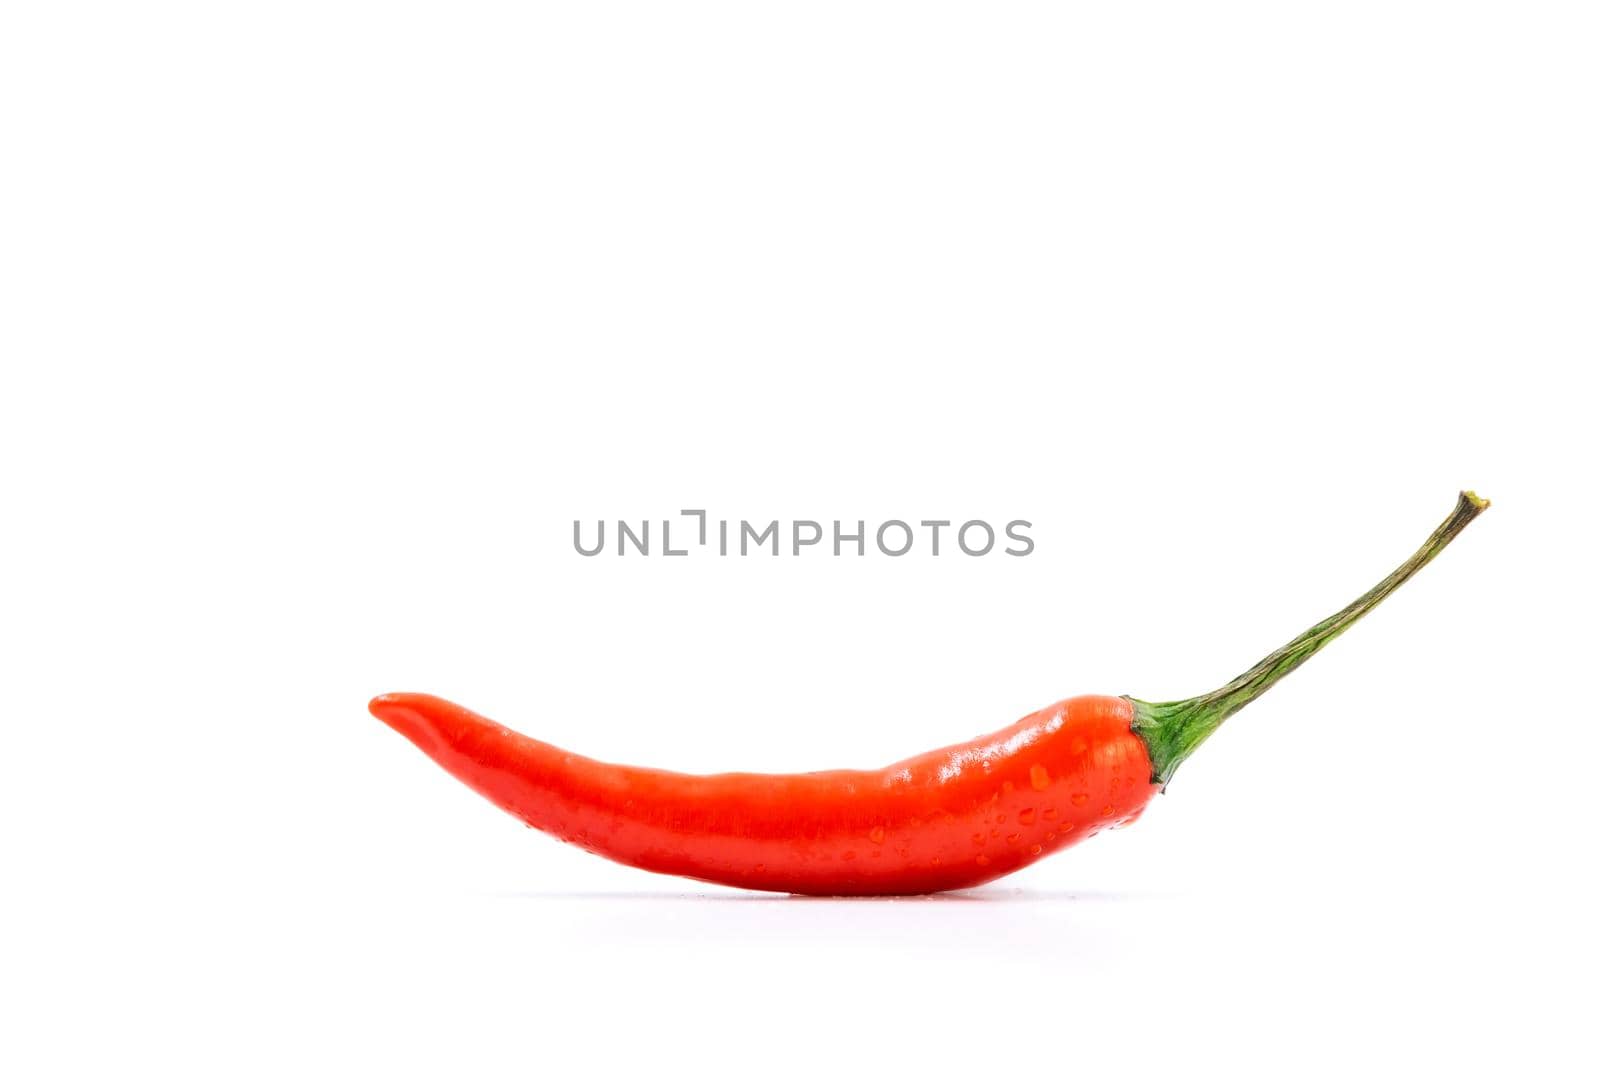 Single fresh red pepper isolated on white background with copy space.